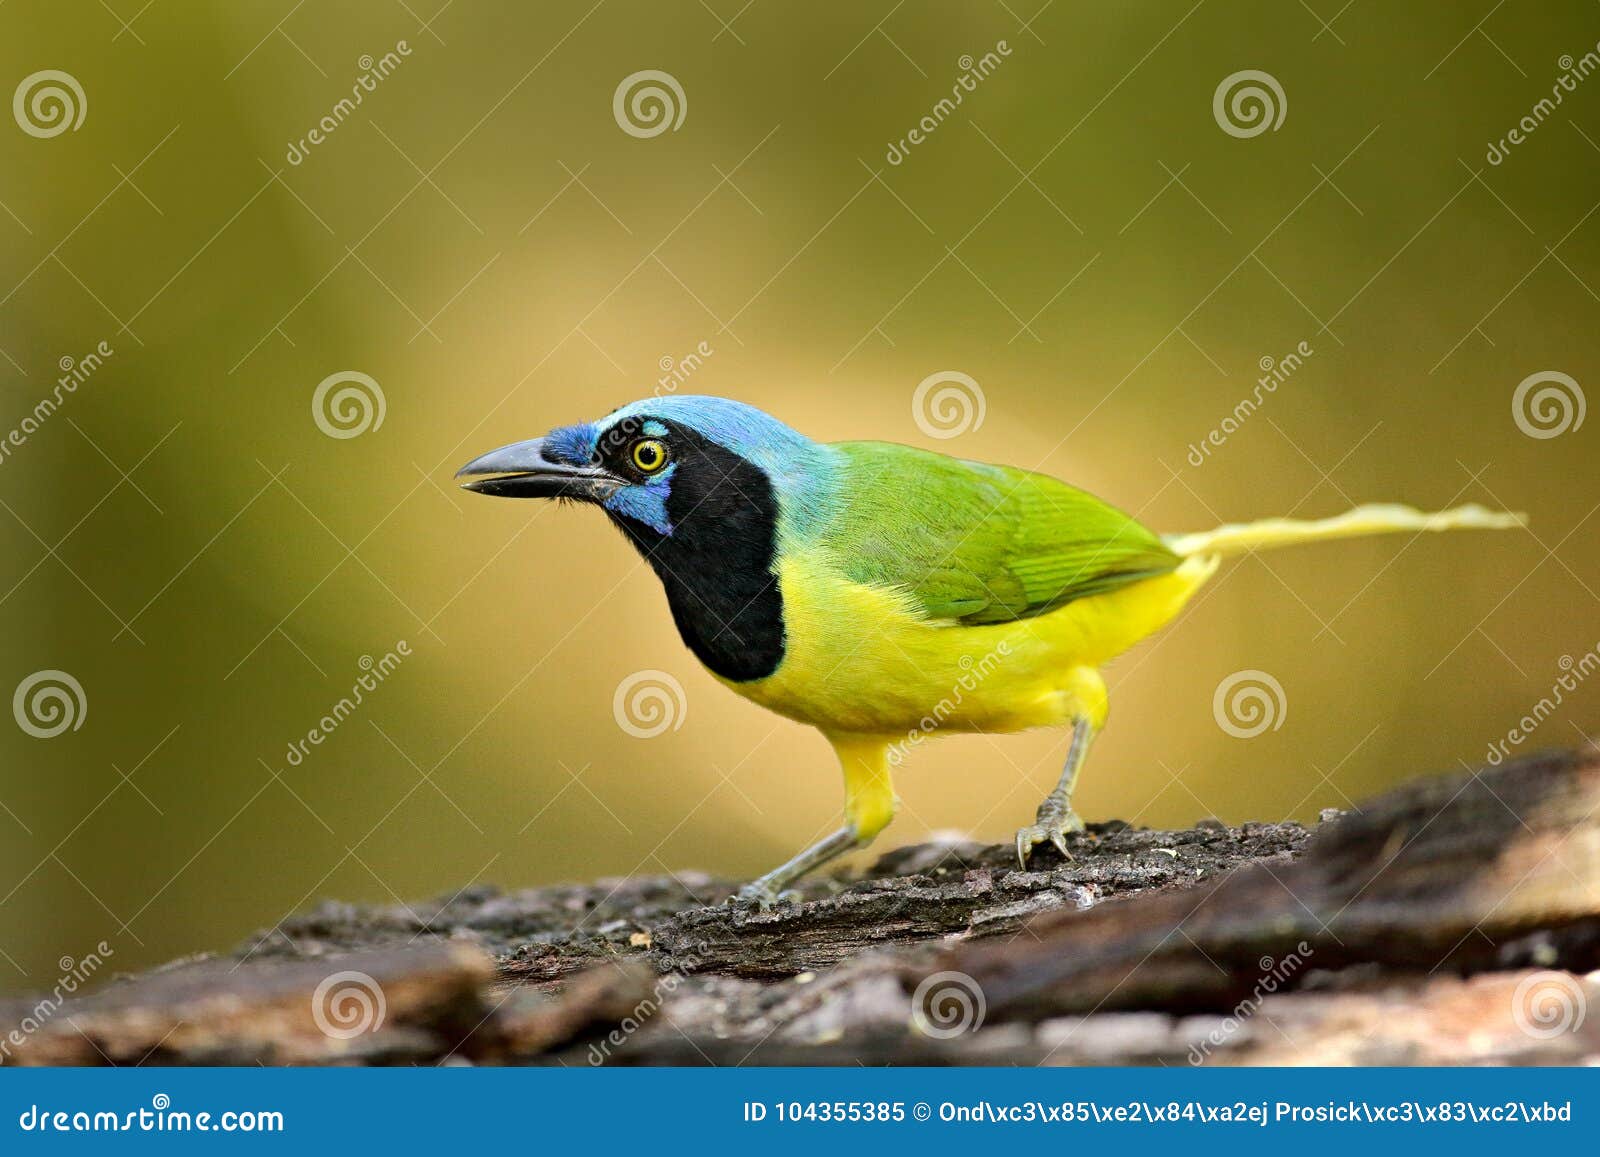 green jay, cyanocorax yncas, wild nature, belize. beautiful bird from central anemerica. birdwatching in belize. jay sitting on th